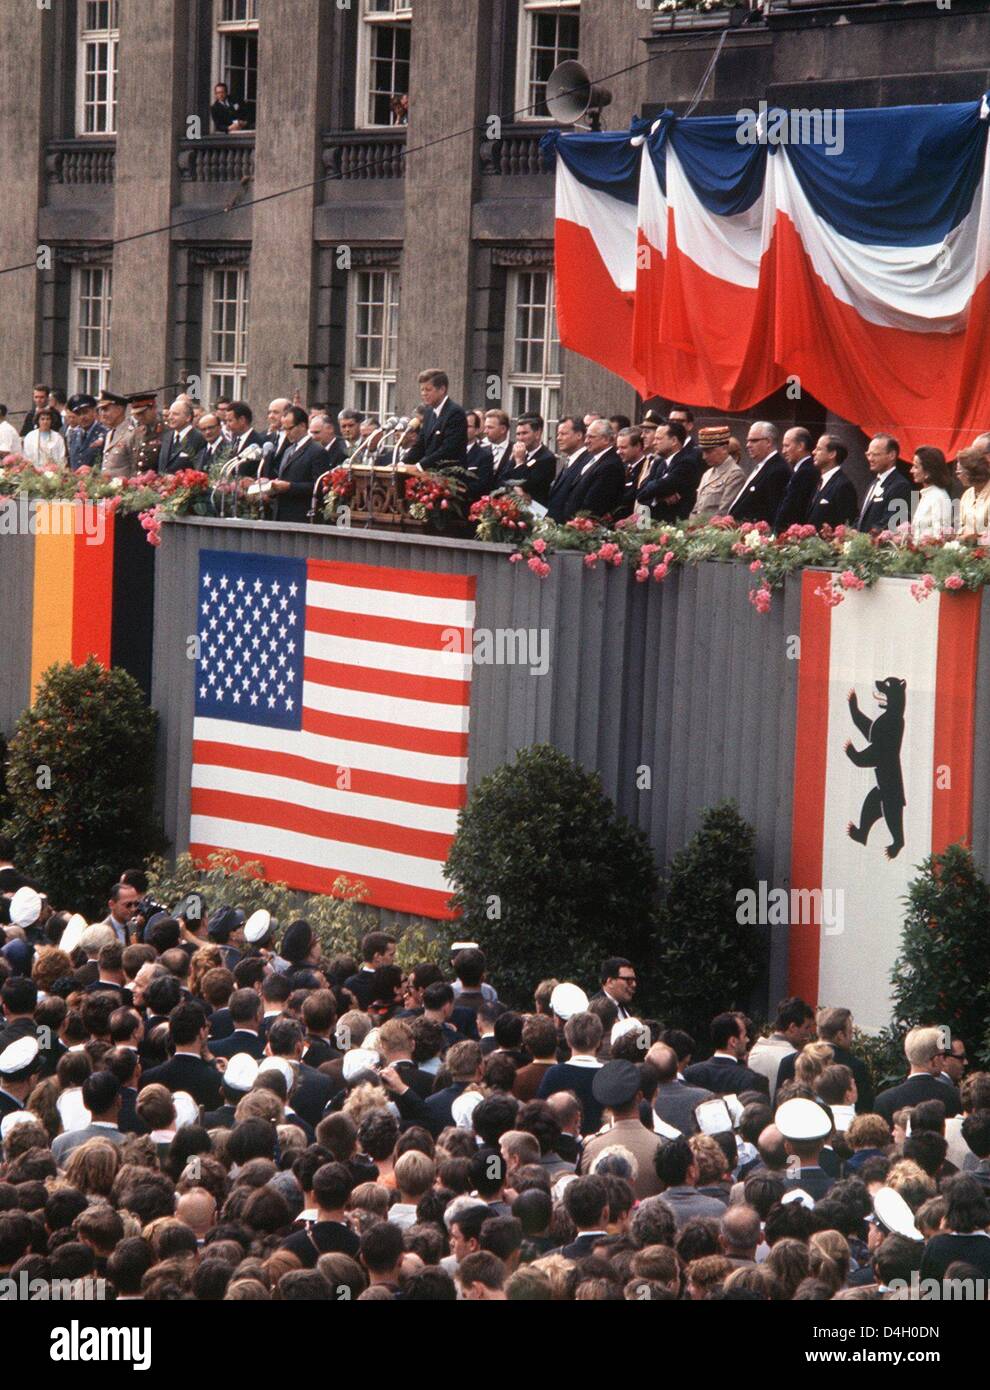 (dpa-file) The historic picture shows US President John F. Kennedy during his speech in front of Schoeneberg city hall in Berlin, Germany, 26 June 1963. With his legendary sentence 'Ich bin ein Berliner' (I am a Berliner), Kennedy underlined his solidarity with the people of the city. Photo: Heinz-Juergen Goettert Stock Photo